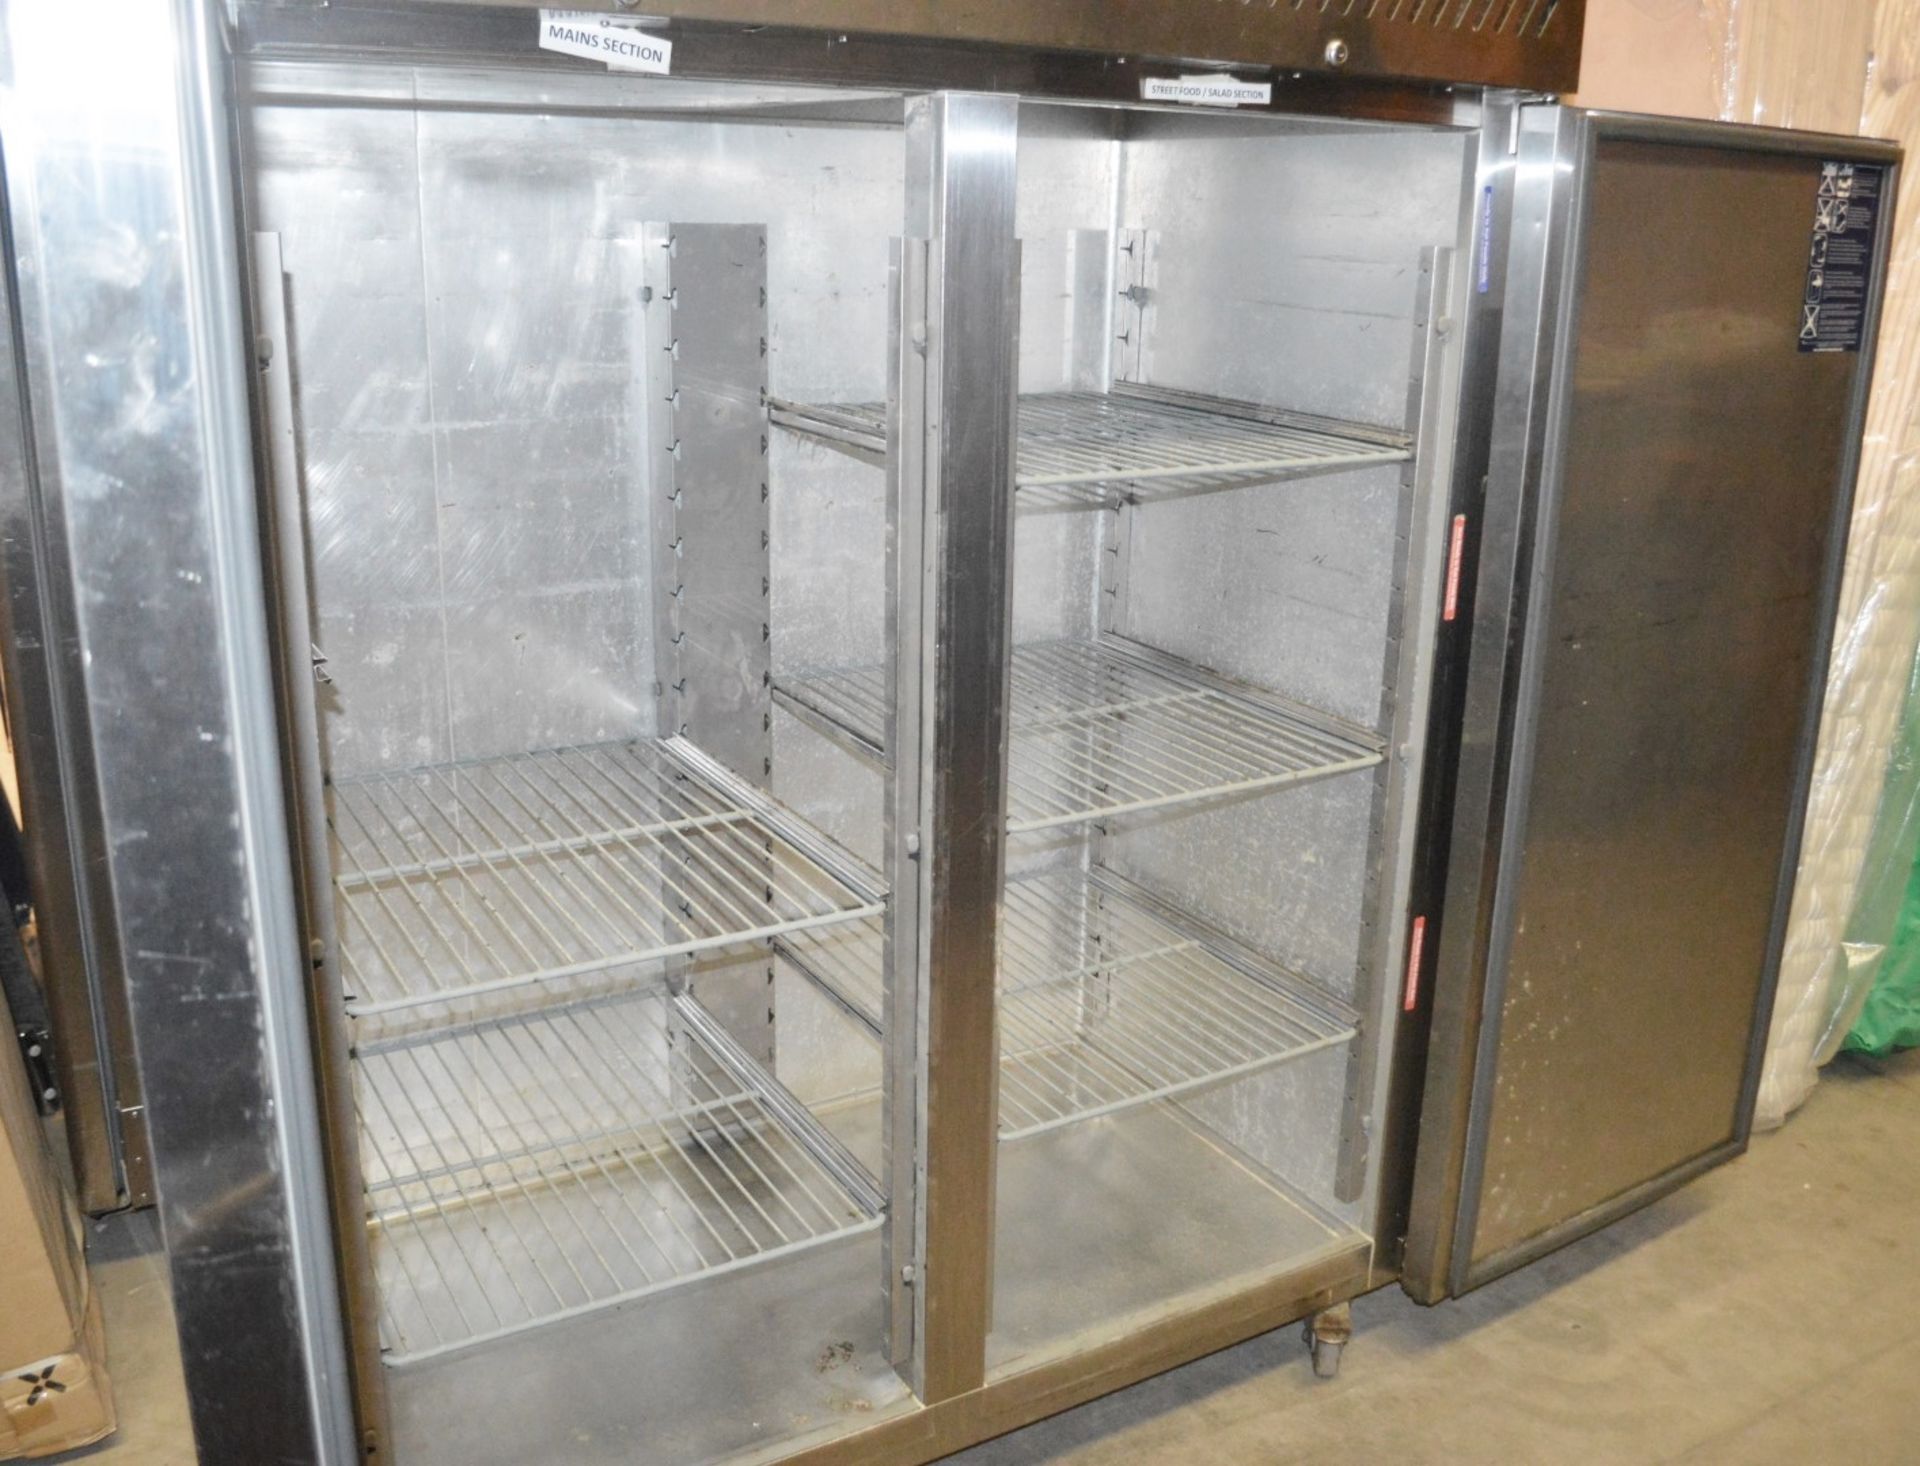 1 x WILLIAMS Upright 2-Door Stainless Steel Commercial Chiller Unit - Dimensions: H195 x W140 x - Image 9 of 12